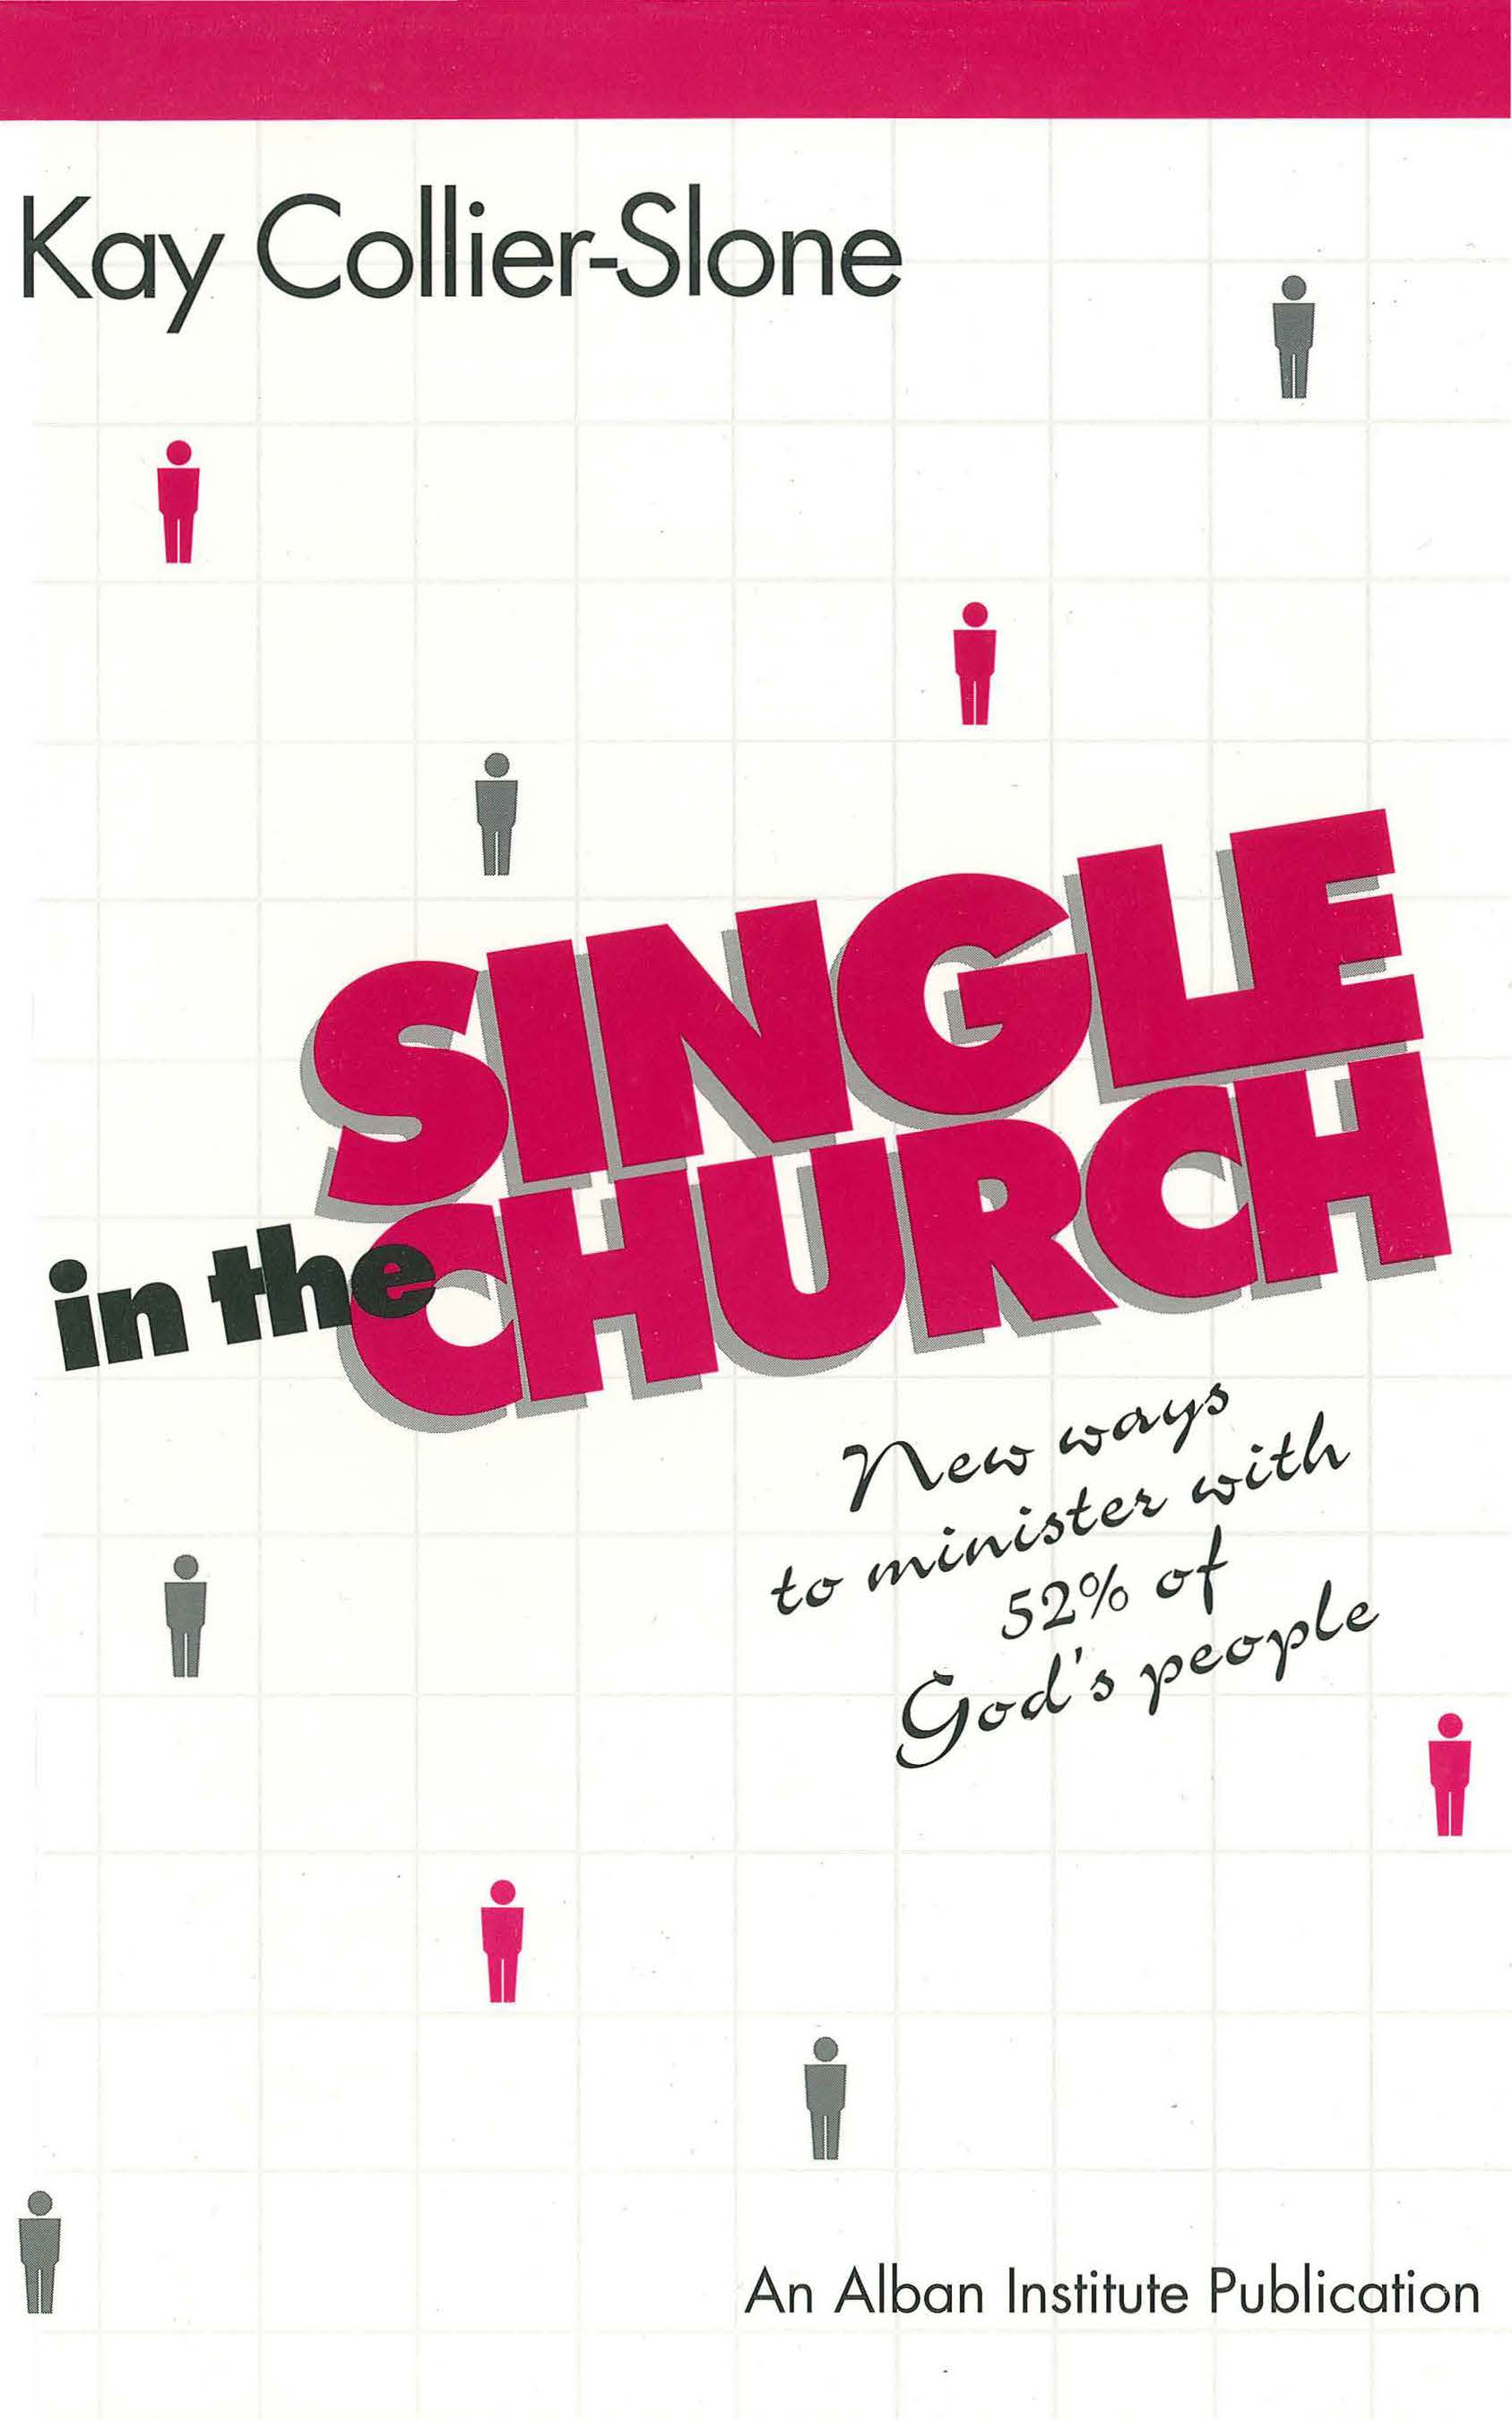 Single in the Church: New Ways to Minister with 52% of God's People